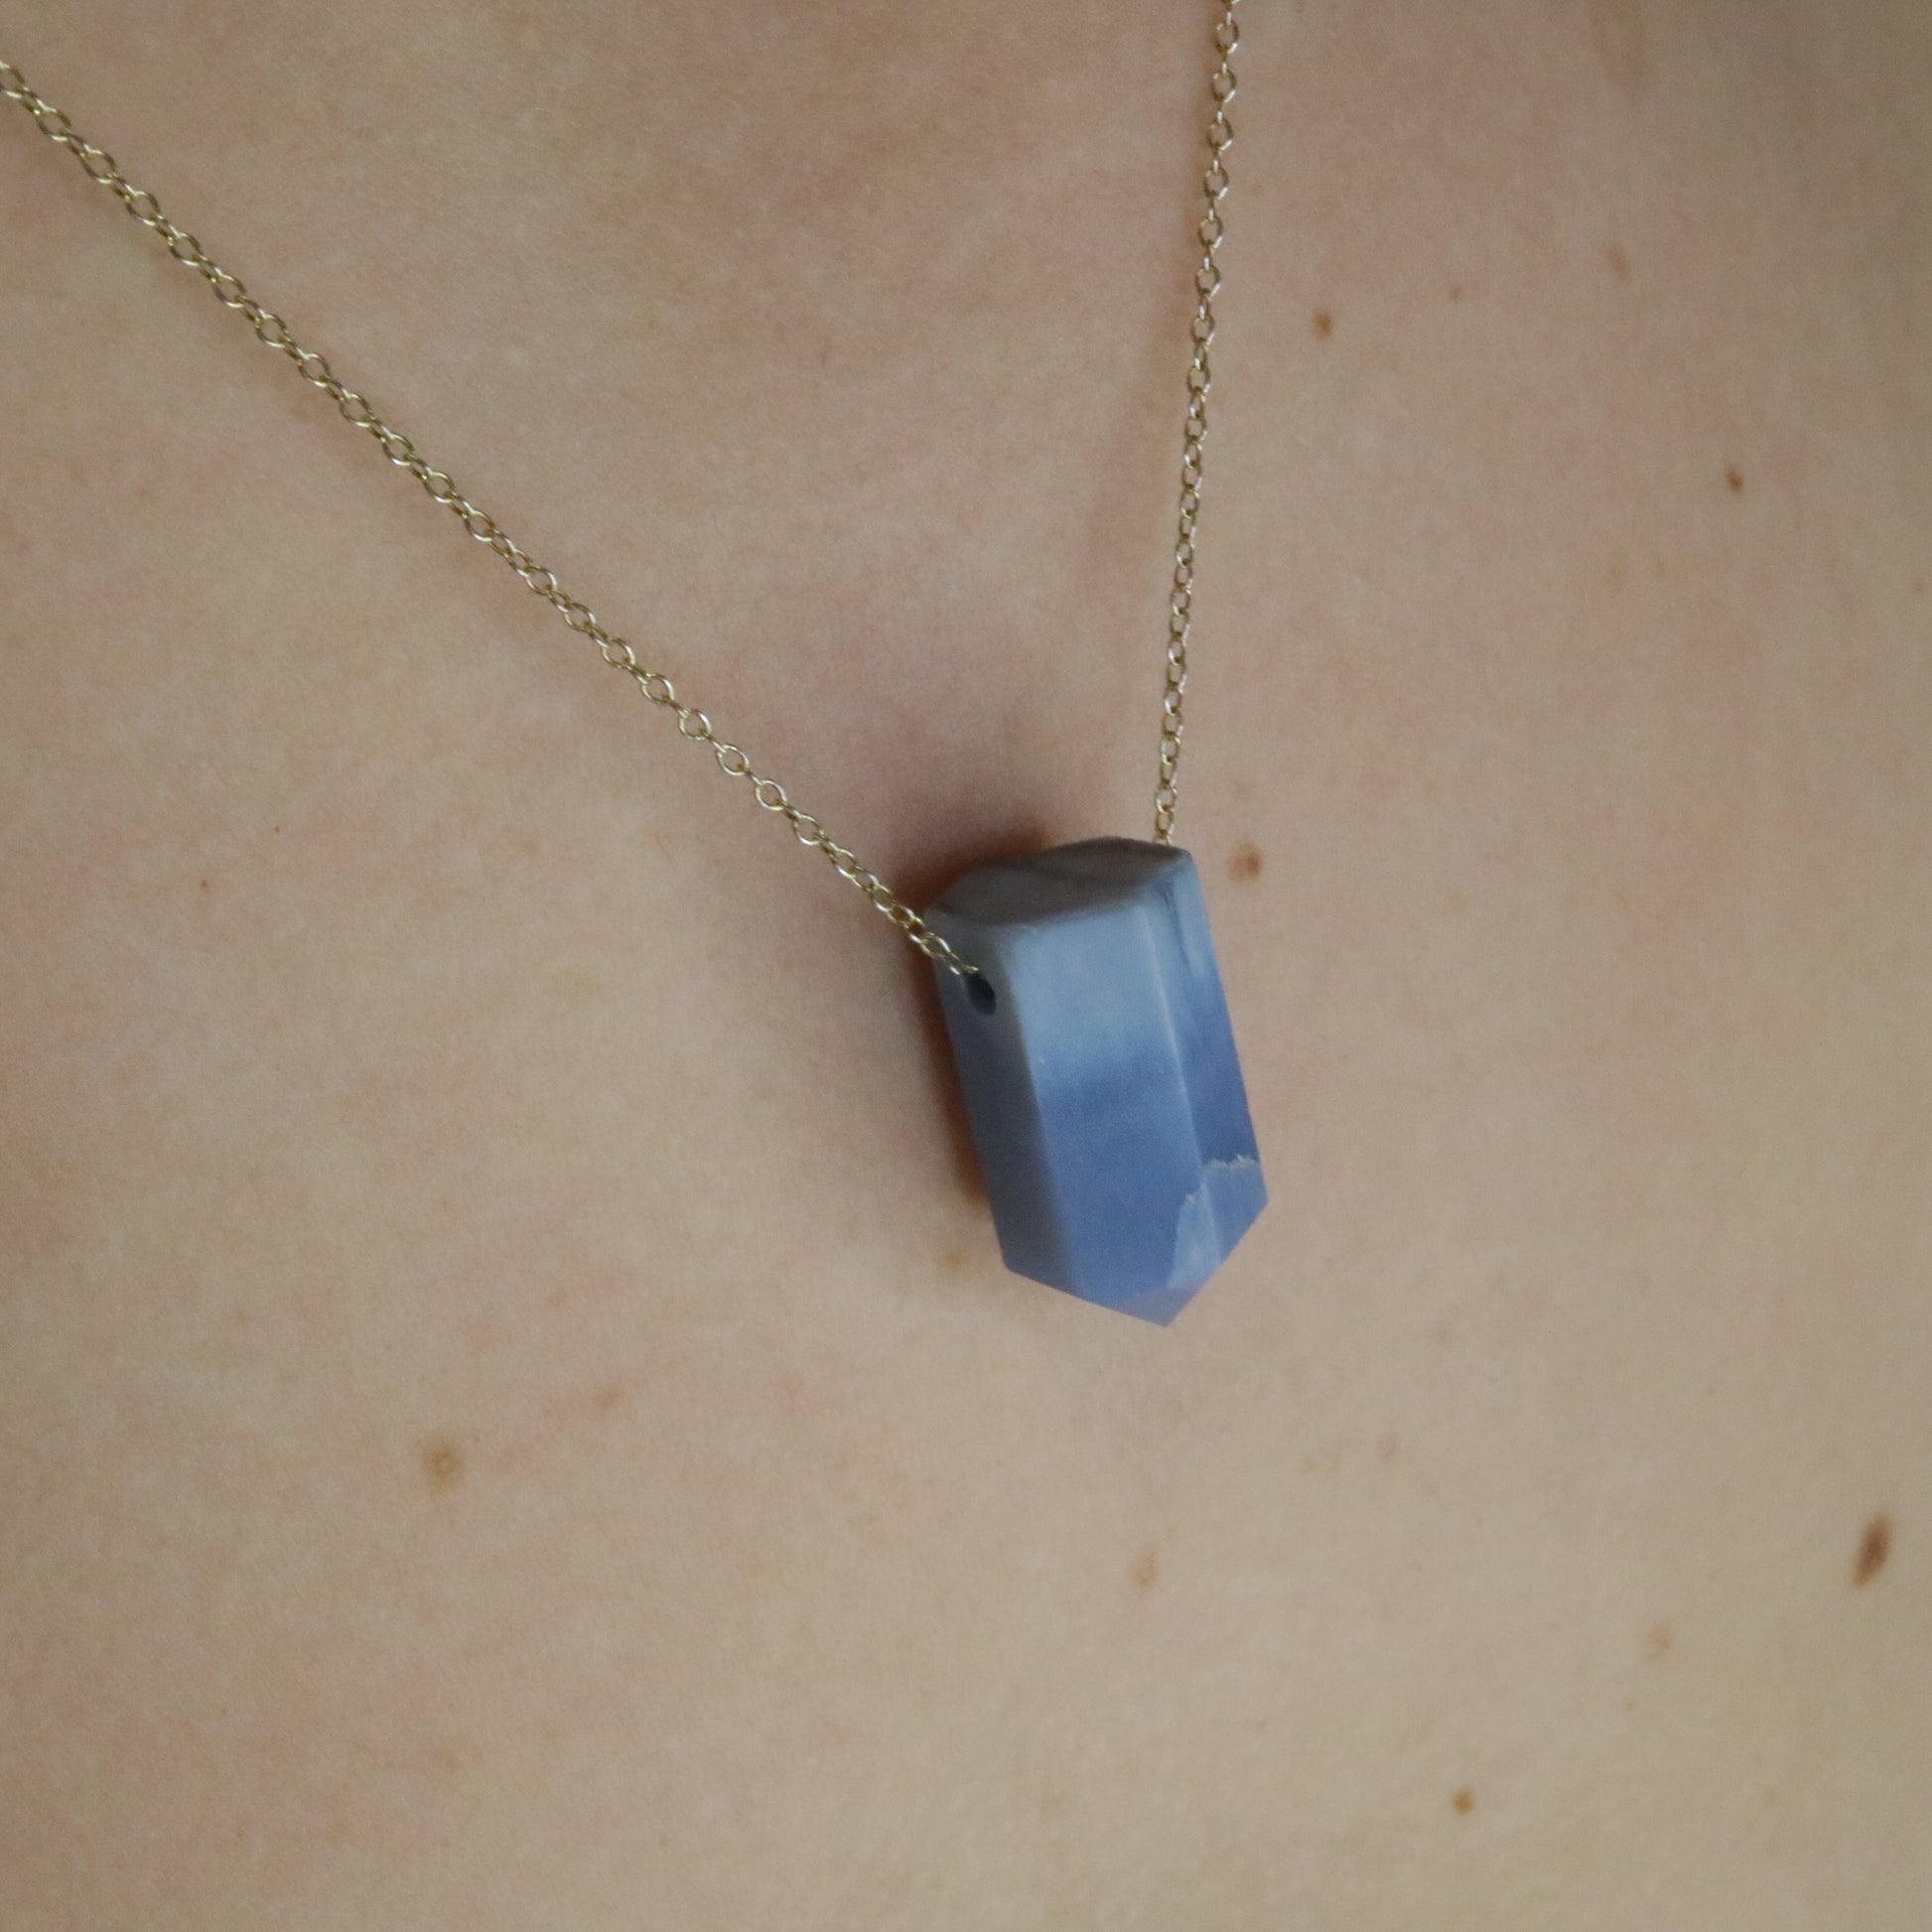 Girl wearing Blue Opal crystal necklace